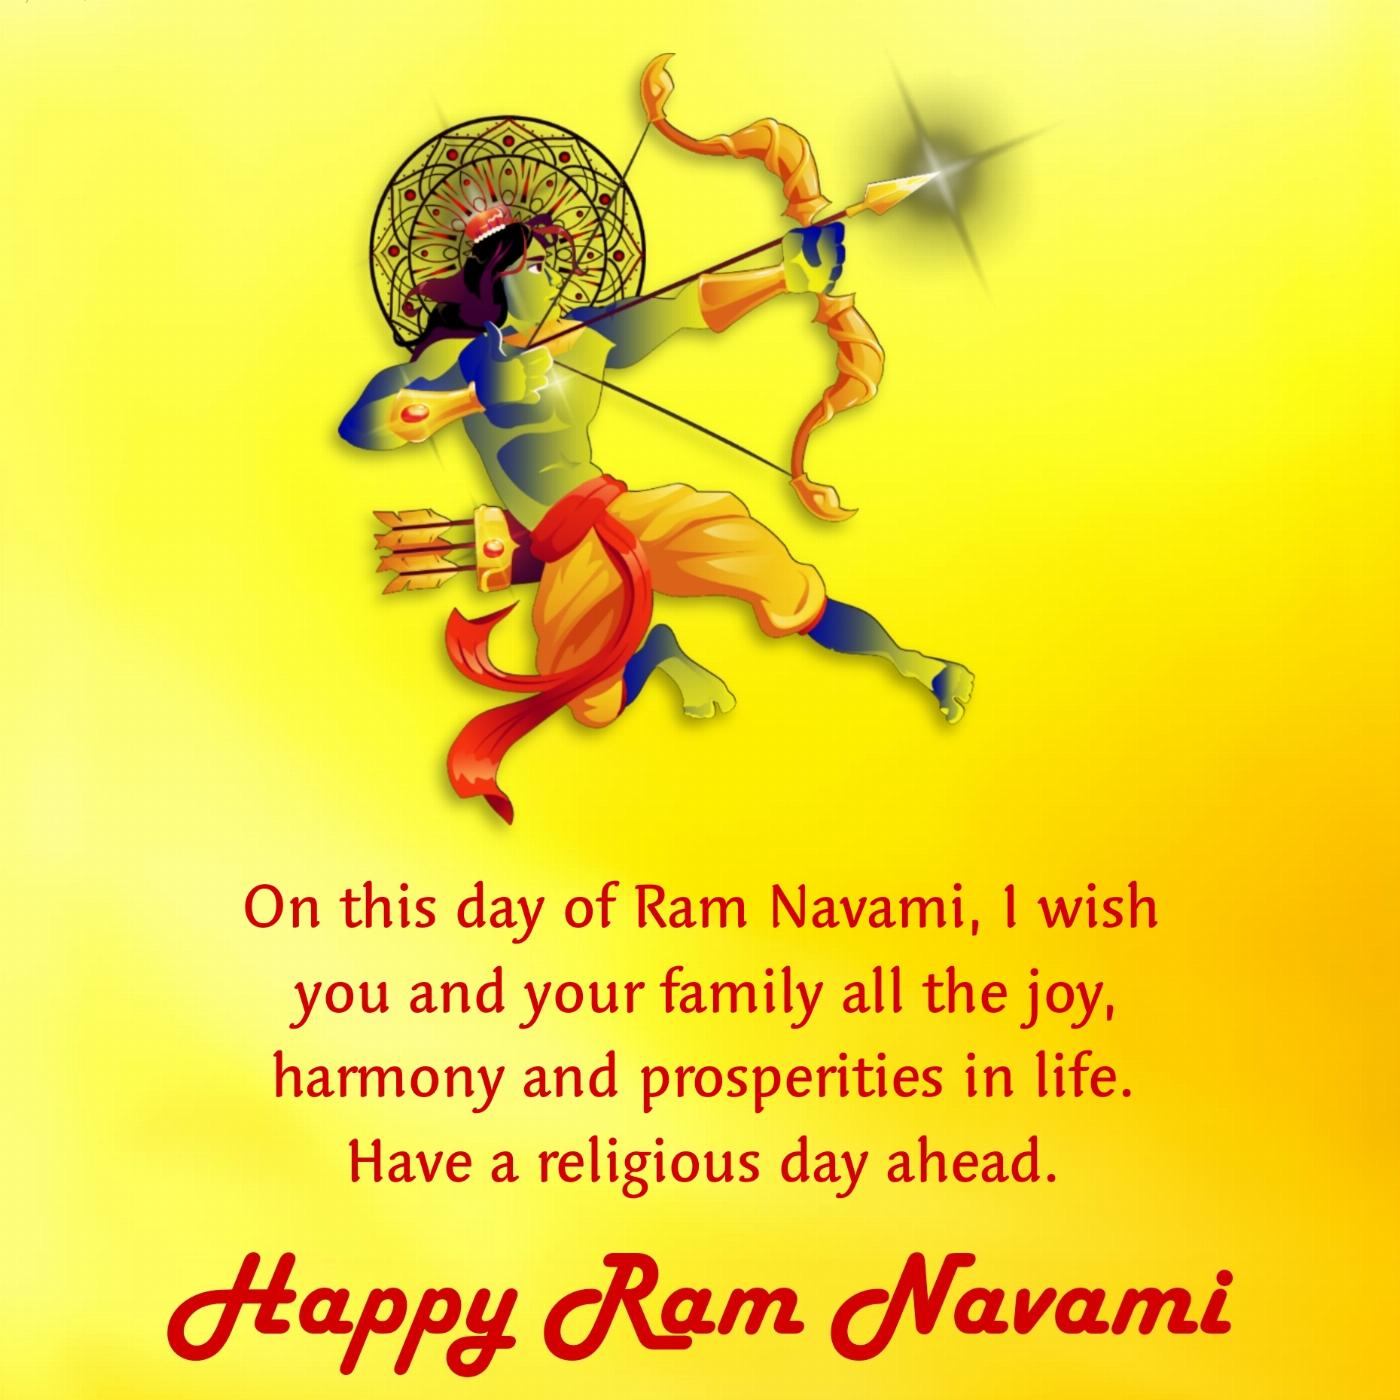 On this occasion of Ram Navami I wish that